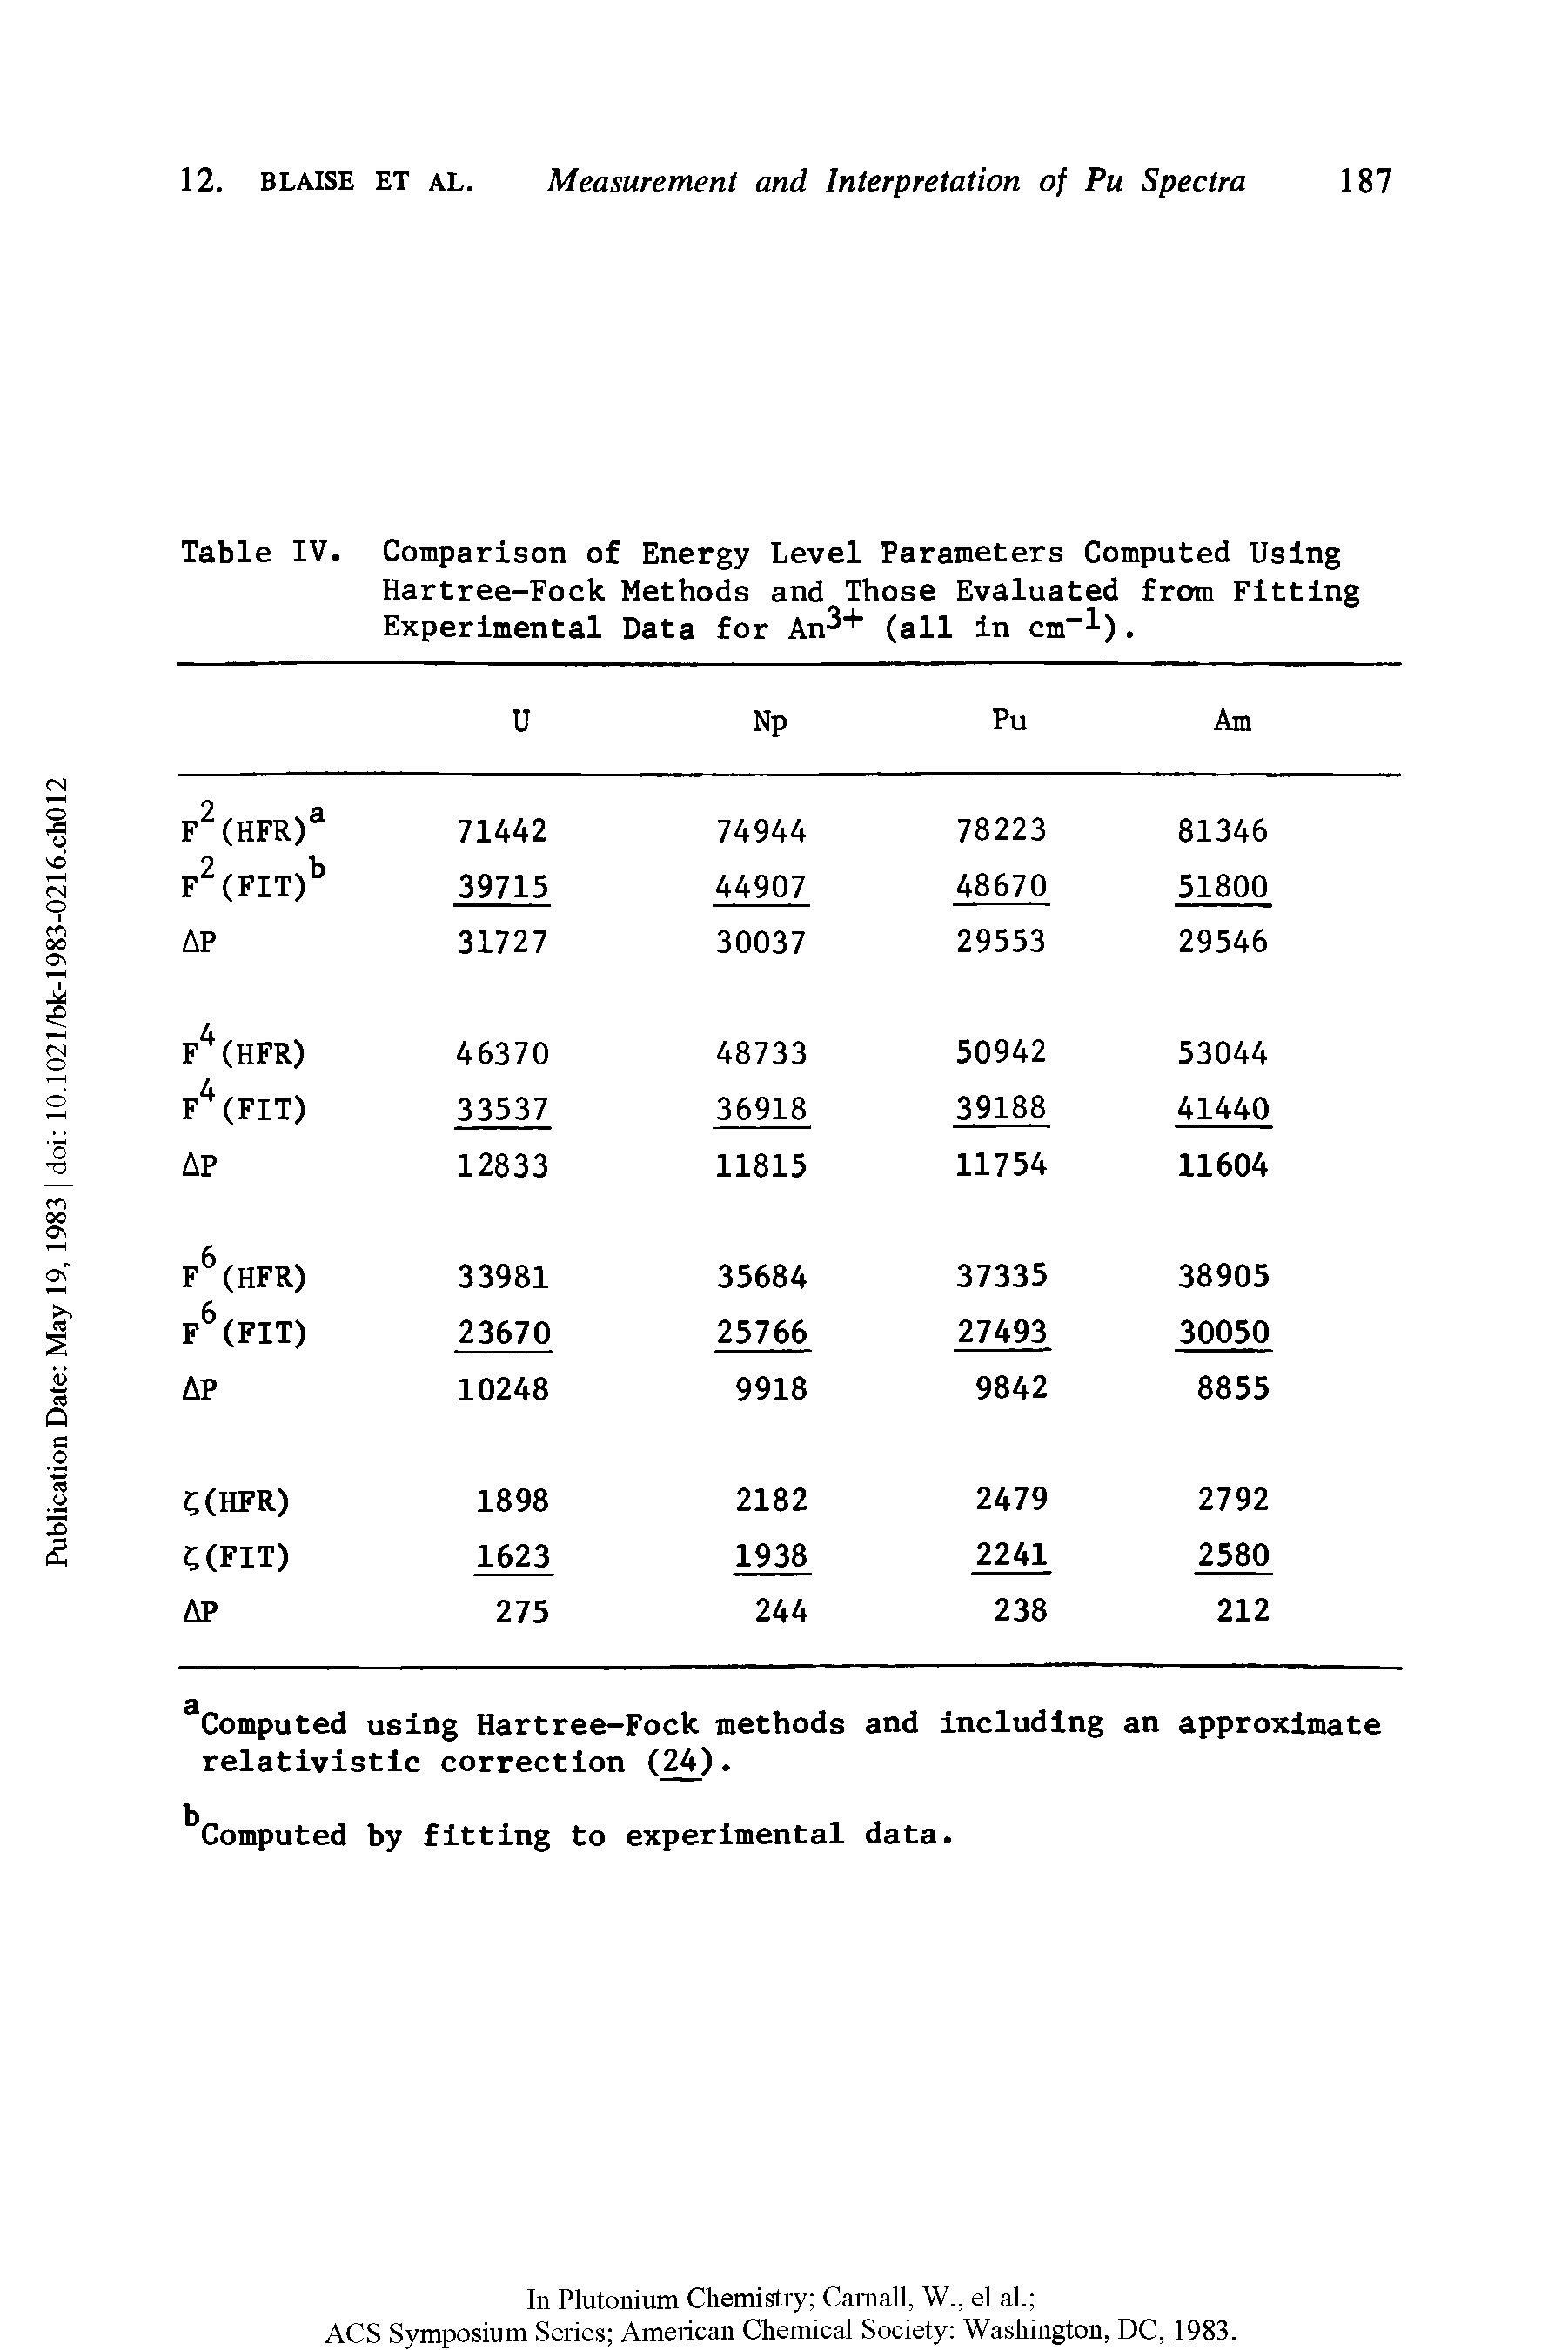 Table IV. Comparison of Energy Level Parameters Computed Using Hartree-Fock Methods and Those Evaluated from Fitting Experimental Data for An + (all in cm l).